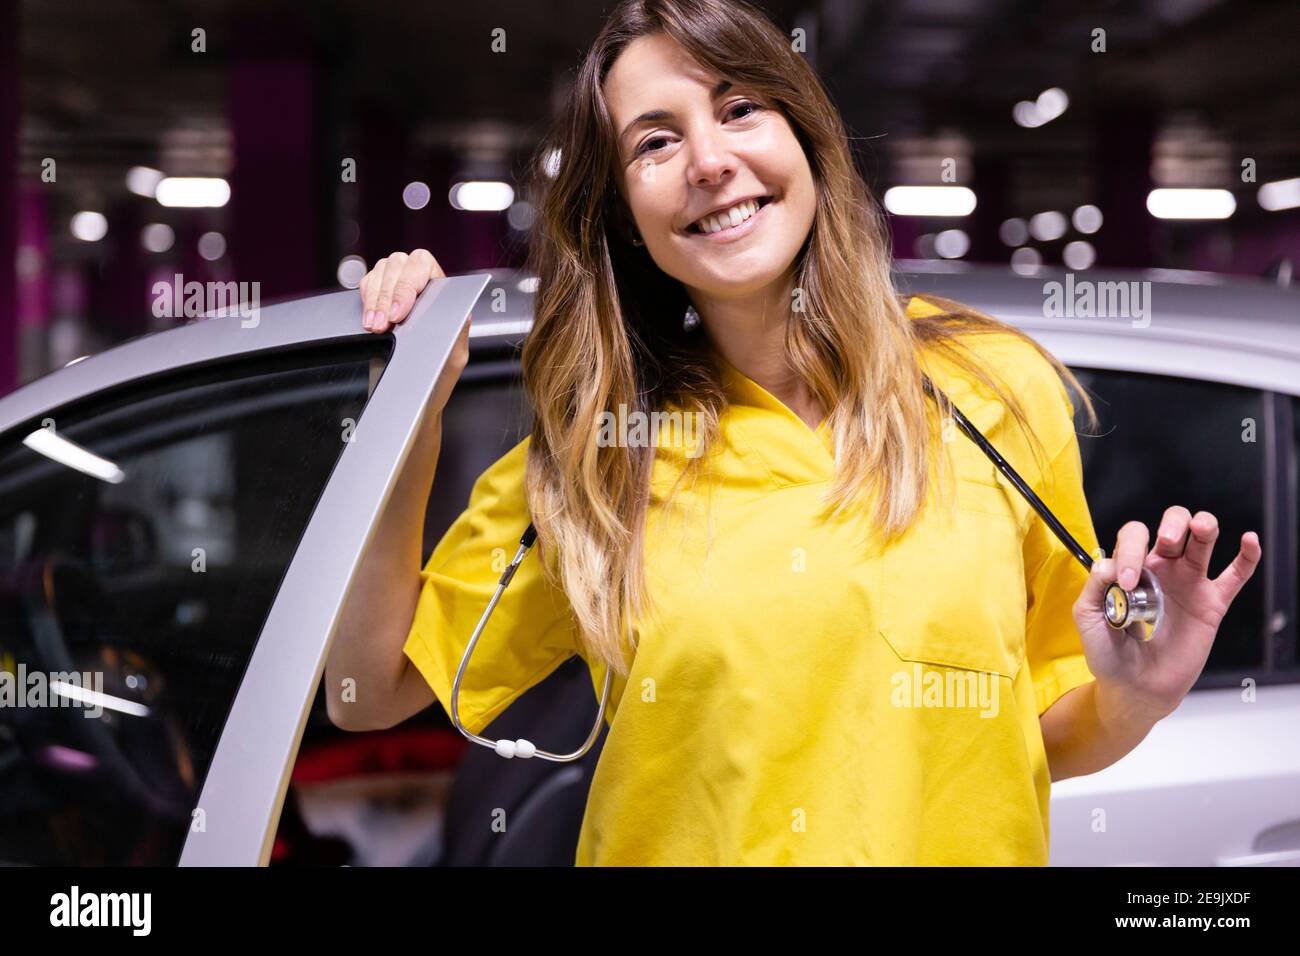 Portrait of young smiling female nurse getting out of her vehicle ready to start work. Space for text. Stock Photo